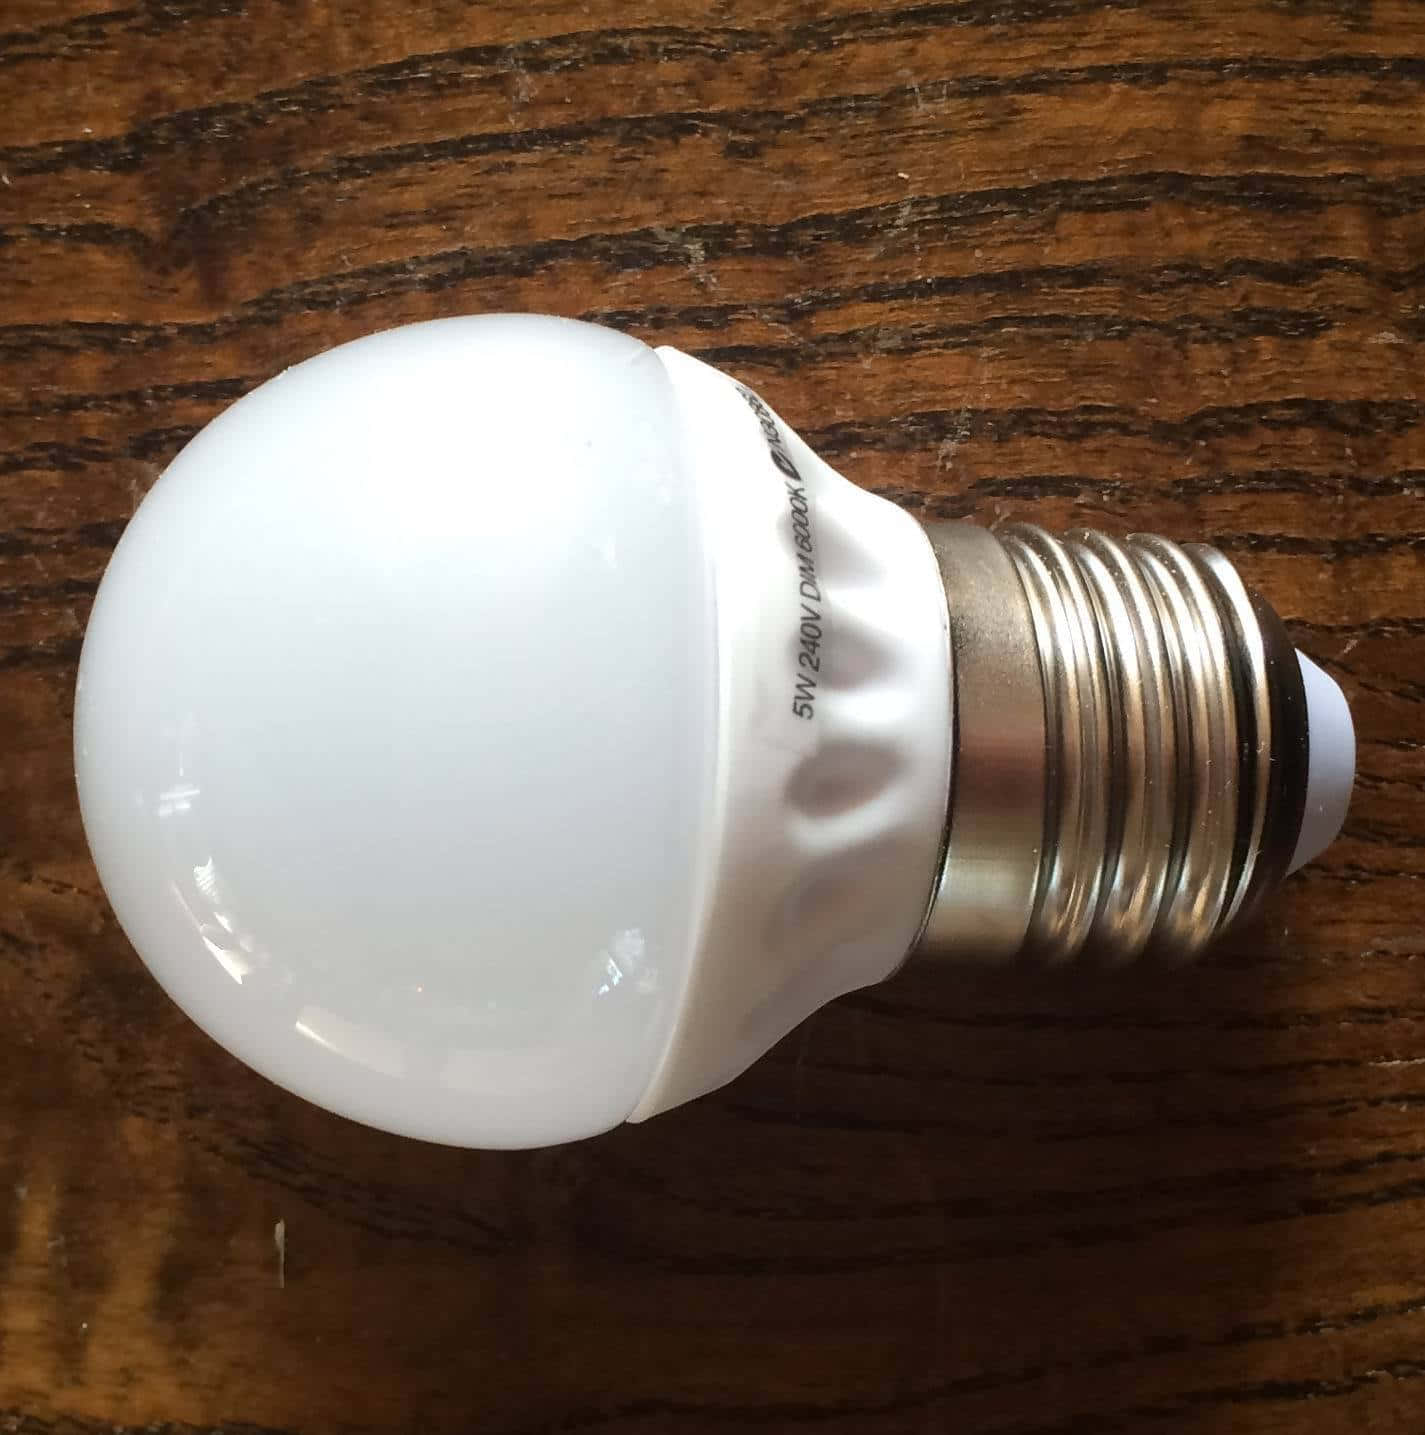 A White Light Bulb On A Wooden Table